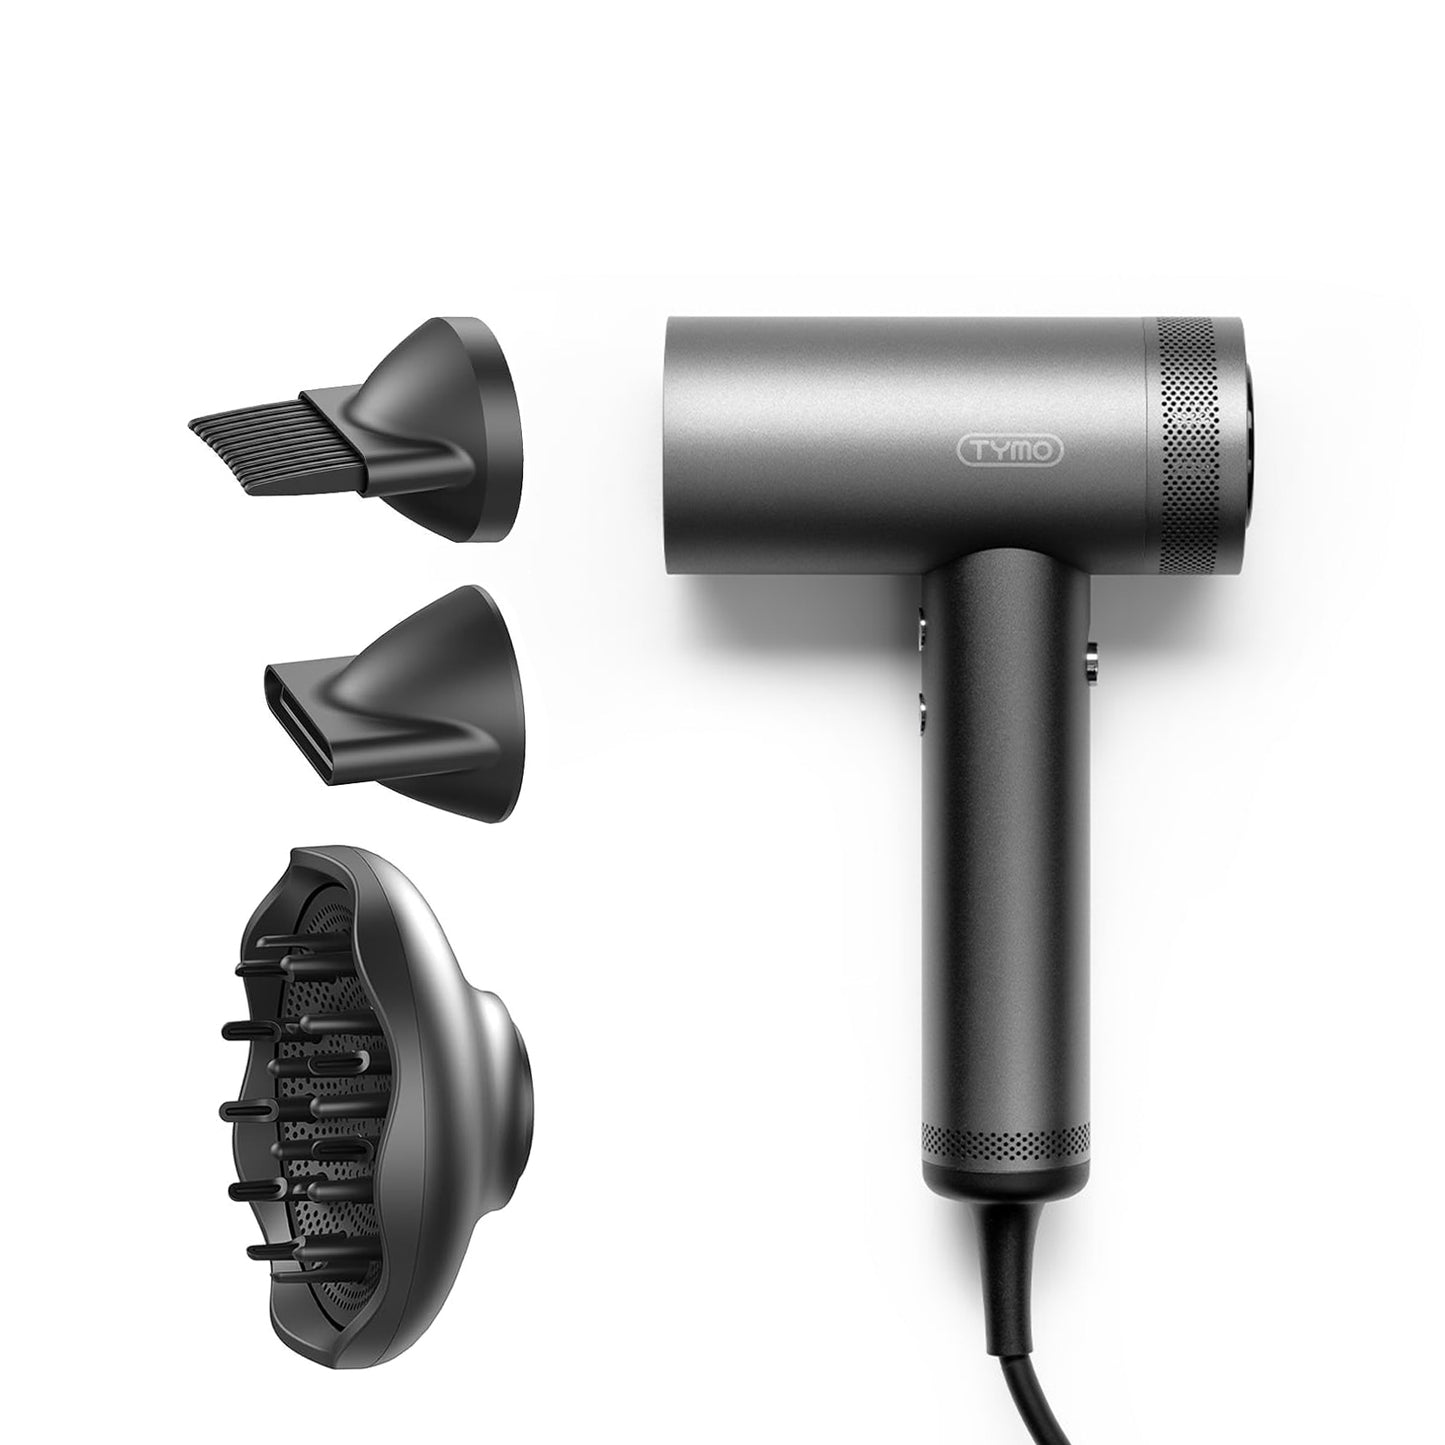 The TYMO AIRHYPE hair dryer in a minimalist design, delivering powerful and efficient hair styling capabilities.